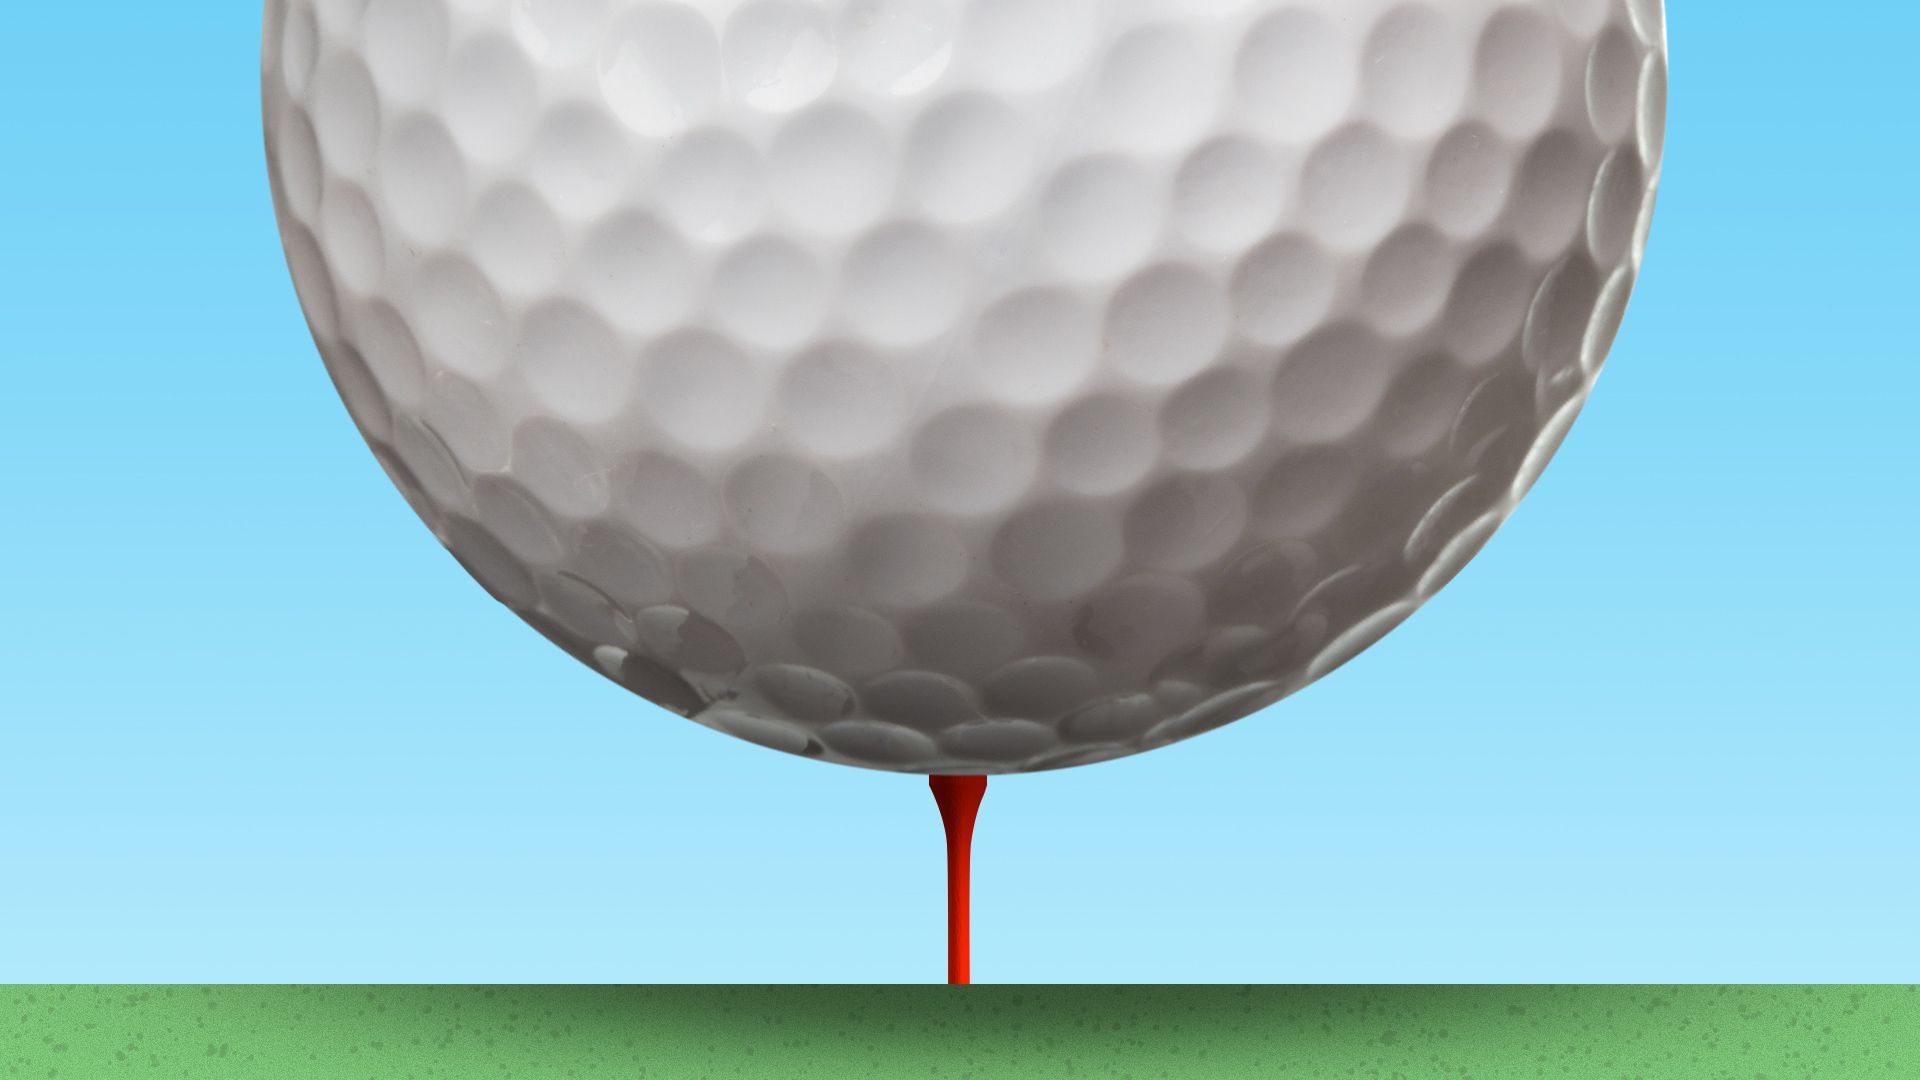 Illustration of a giant golf ball on a tiny tee